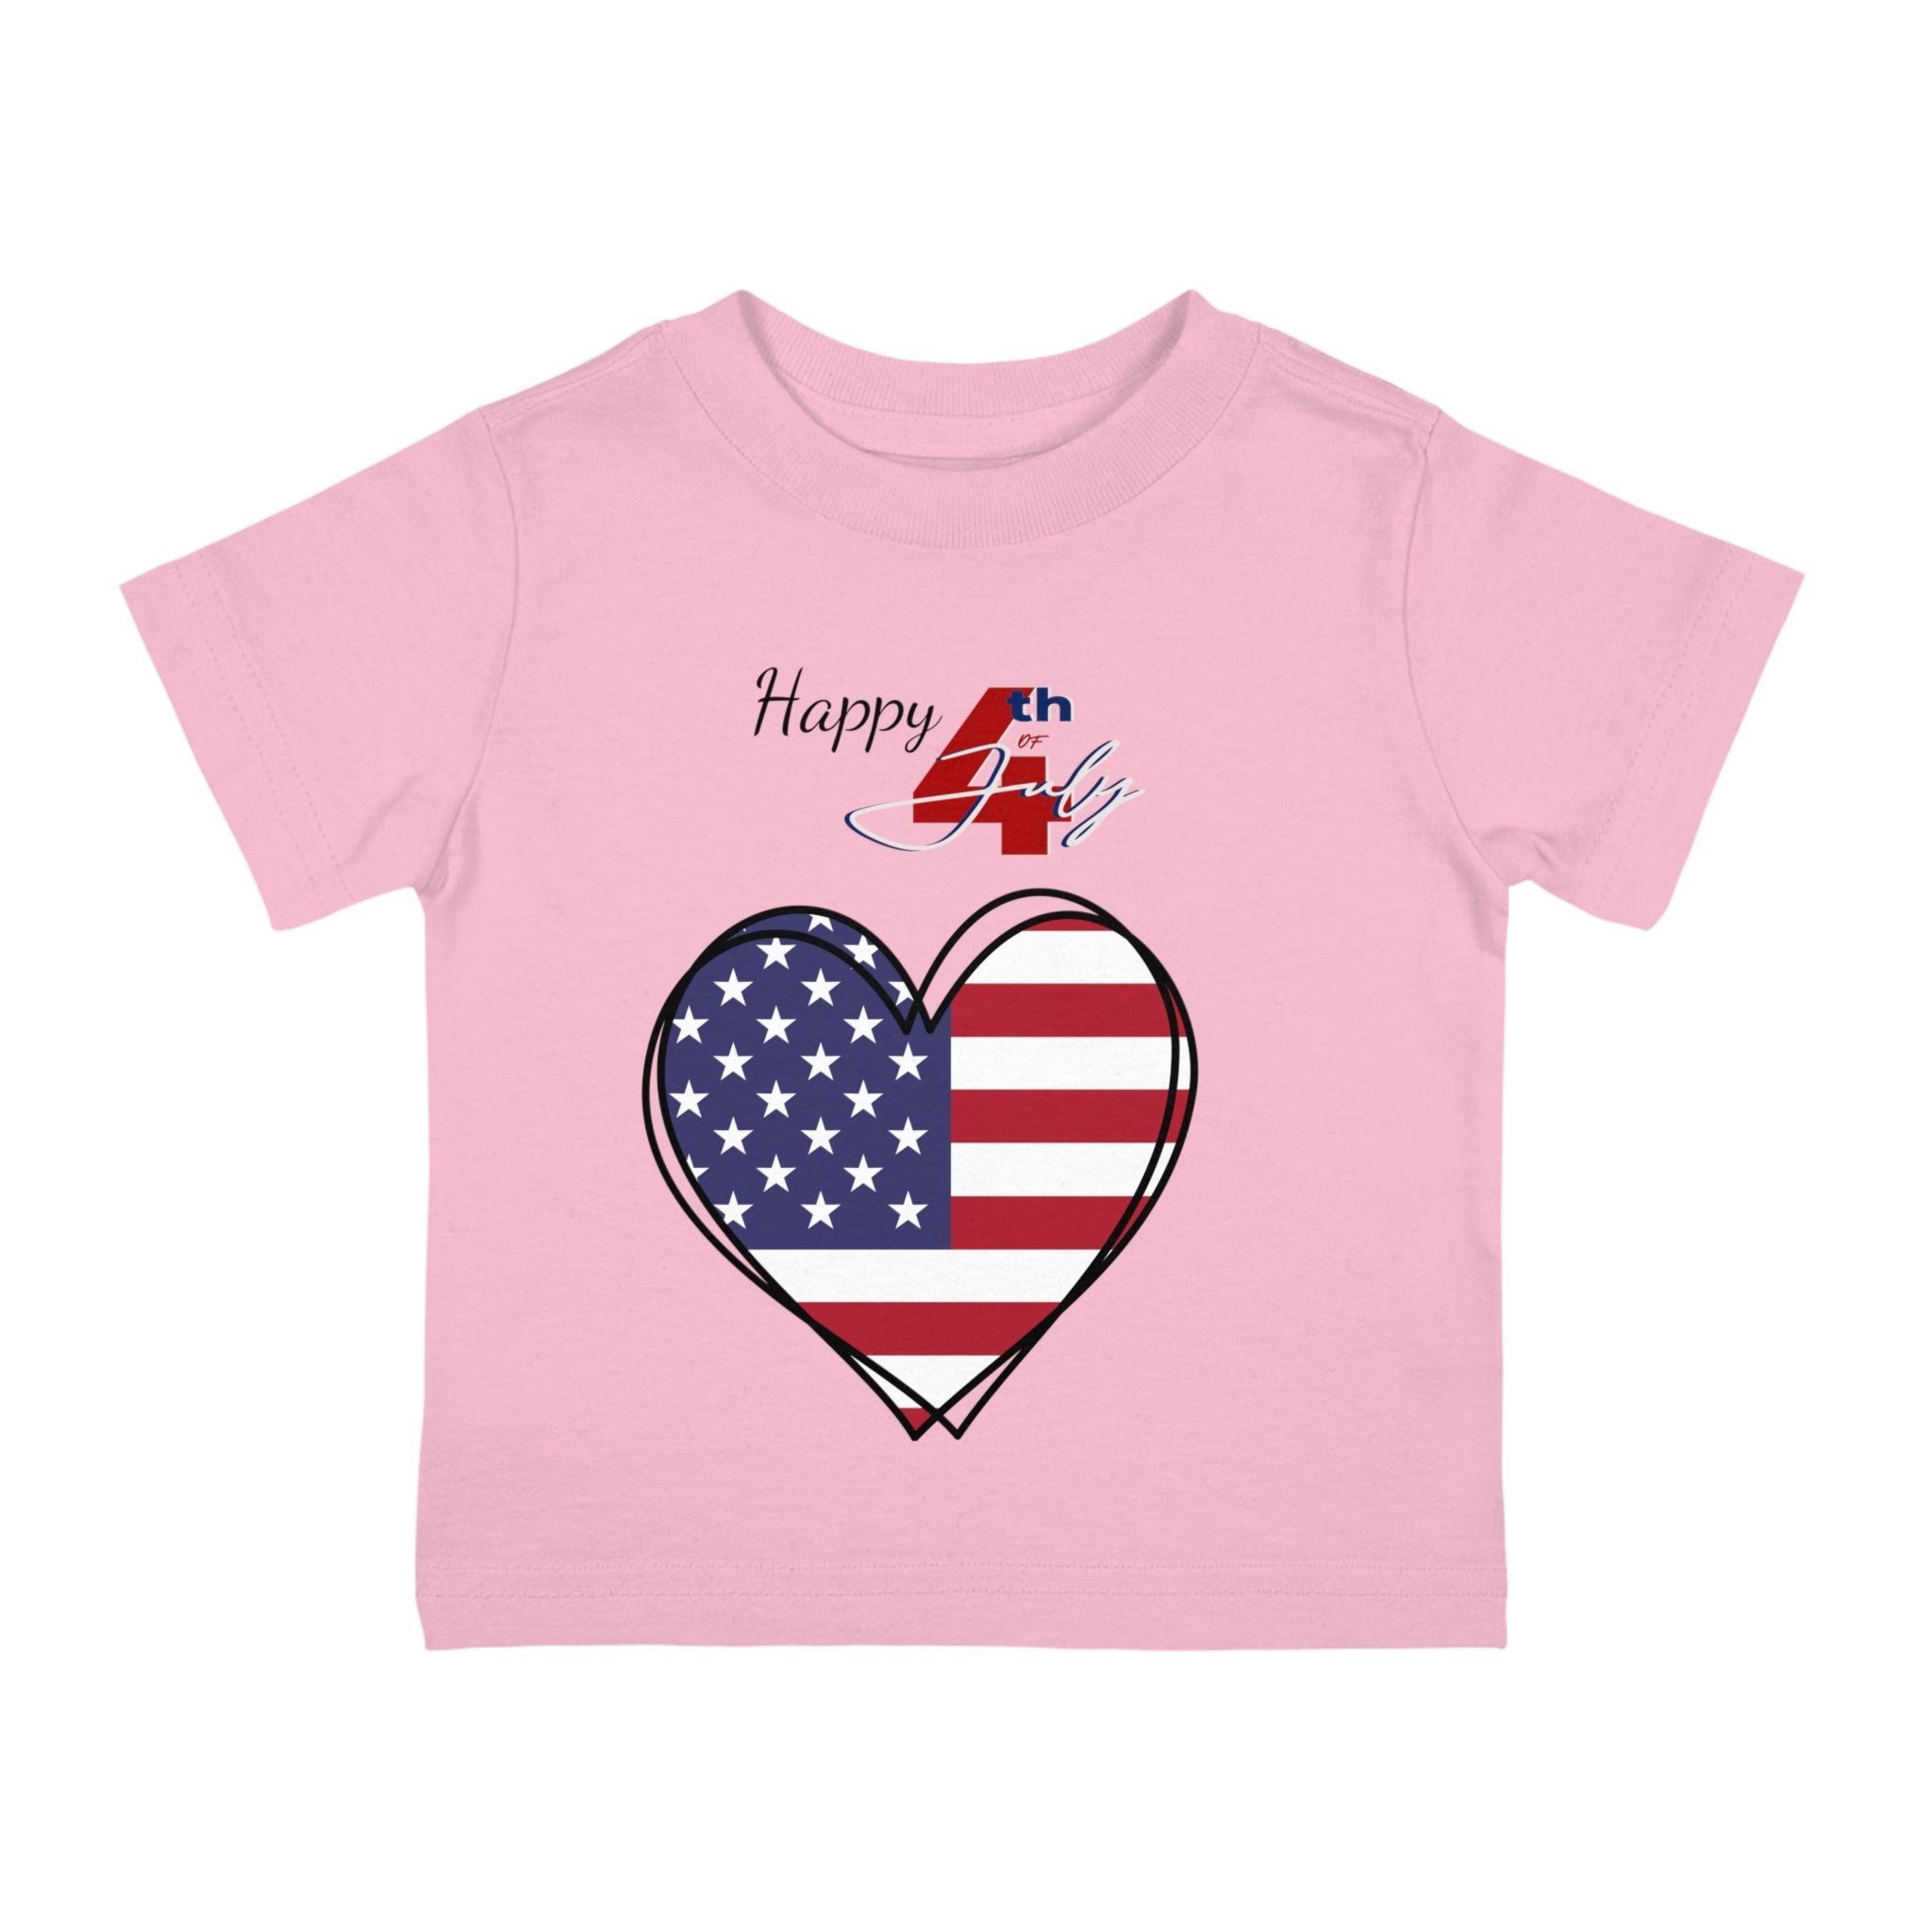 Happy 4th of July American Flag Big Heart design Infant Shirt, Baby Tee, Infant Tee